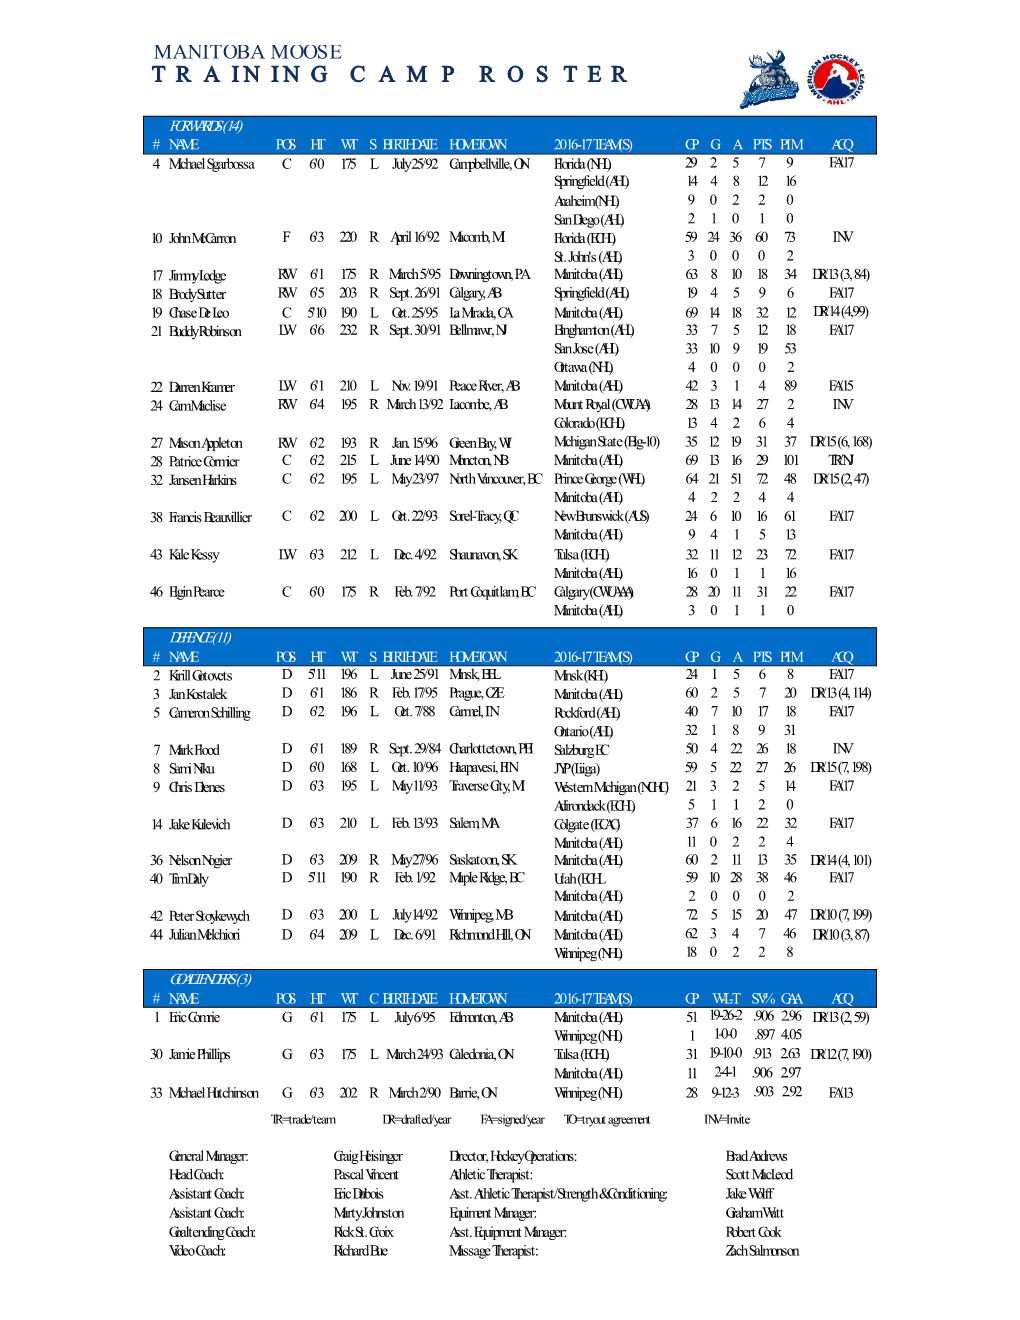 Training Camp Roster